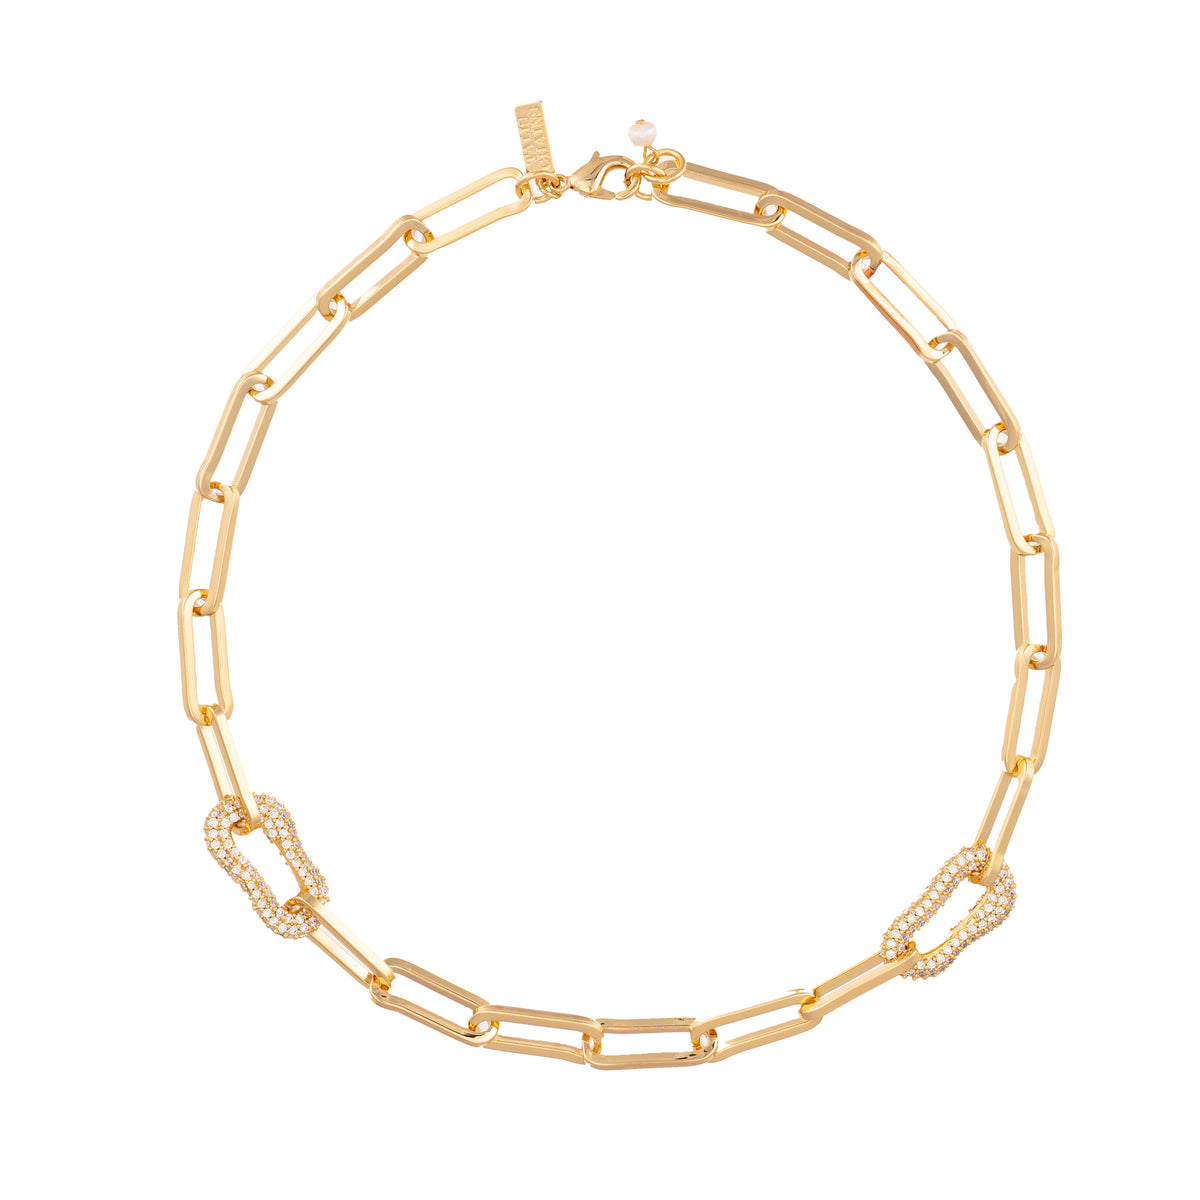 Gold plated chain necklace with cz link details